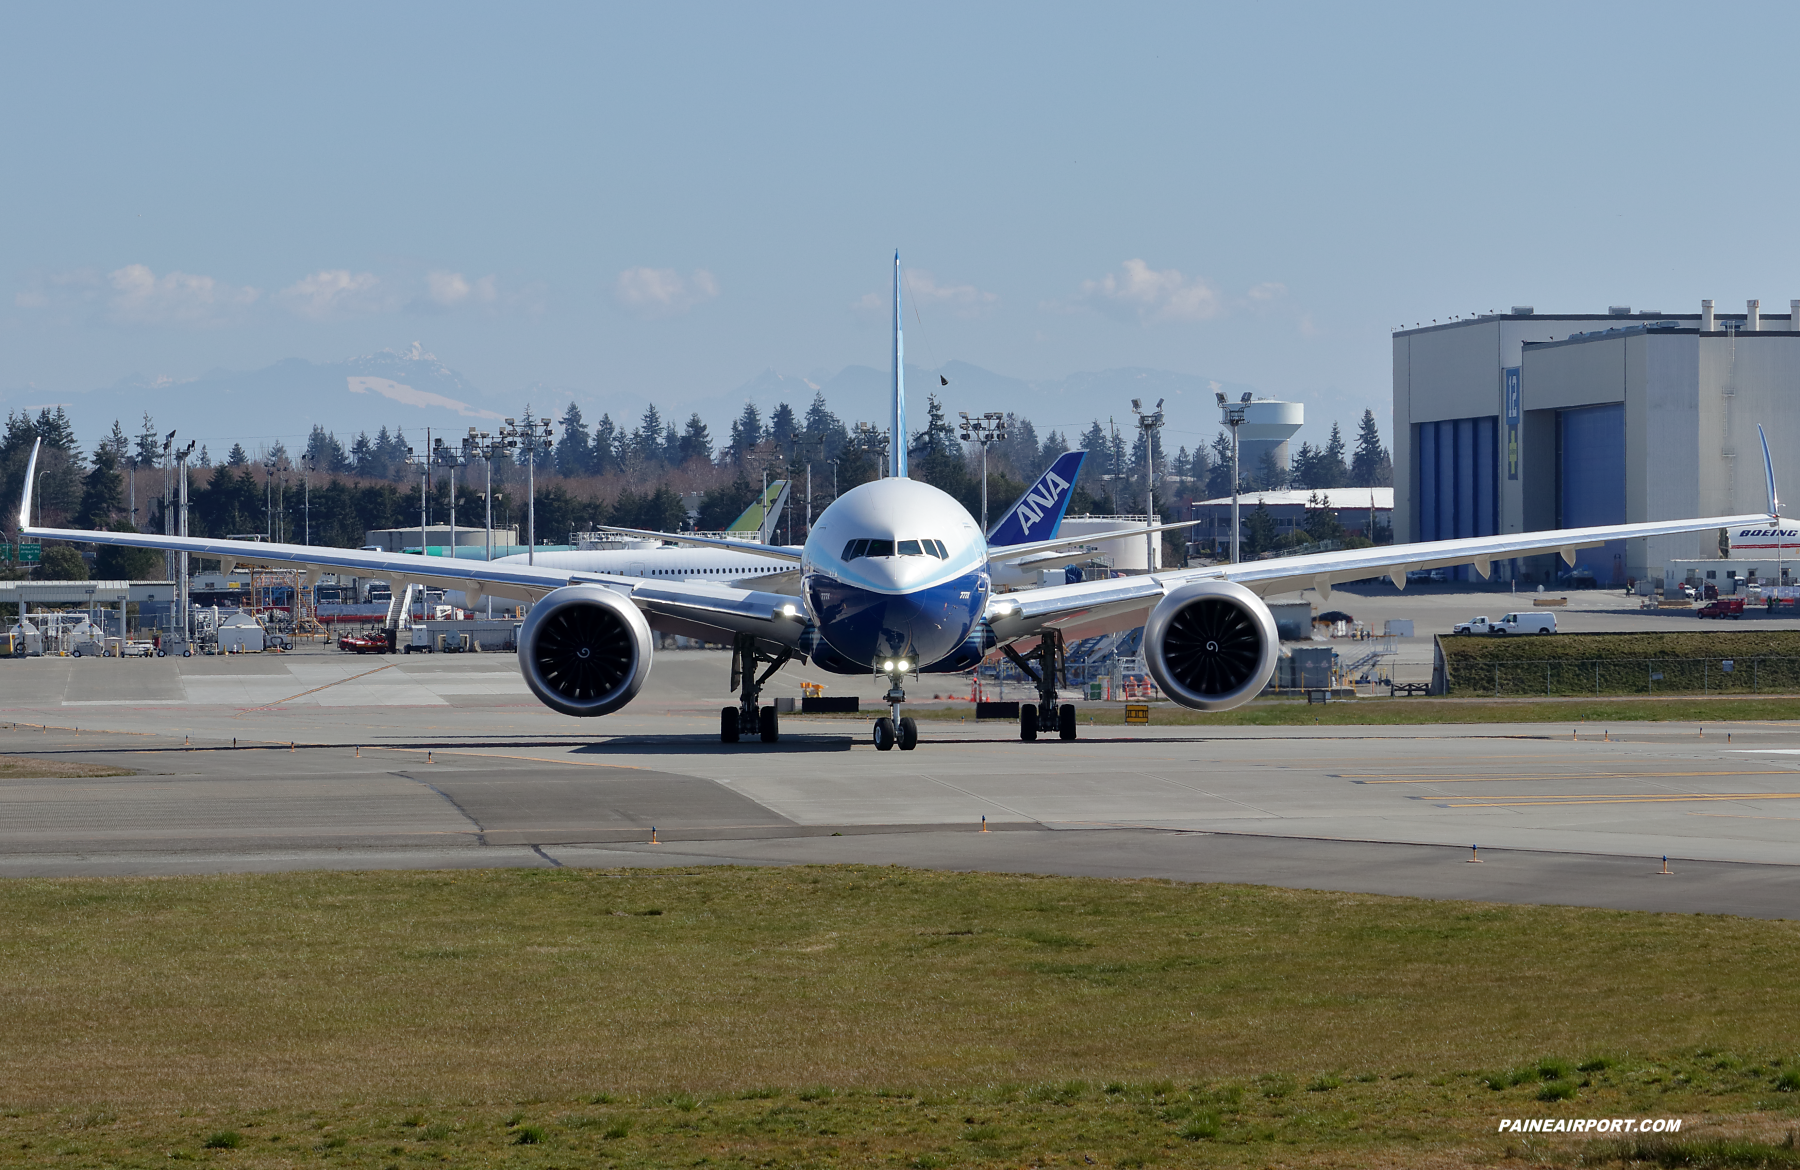 777-9 N779XX at Paine Field